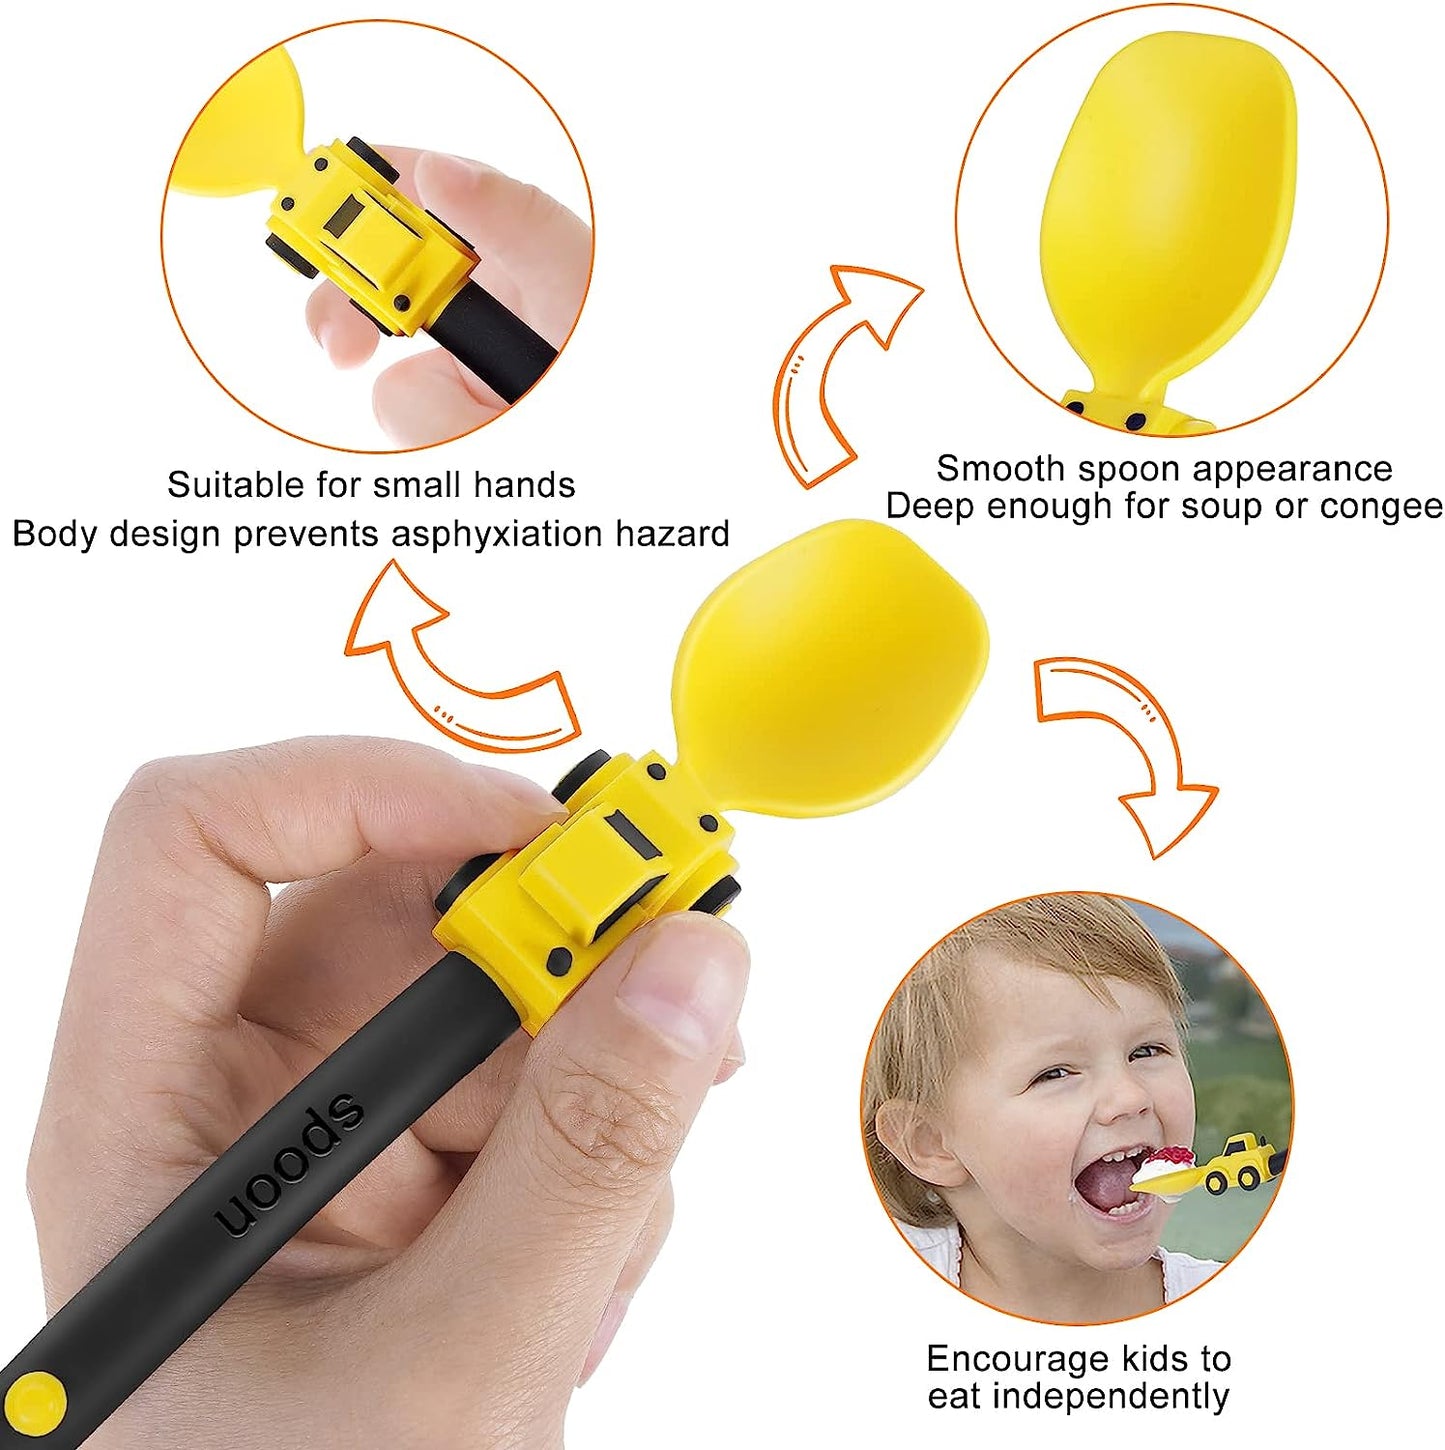 Construction Toddler Utensils Set - Toddler Forks and Spoons - Kids Spoon and Fork Set - Suitable for Baby and Toddlers - Portable Utensils Set for 1-5 Year Olds - Yellow